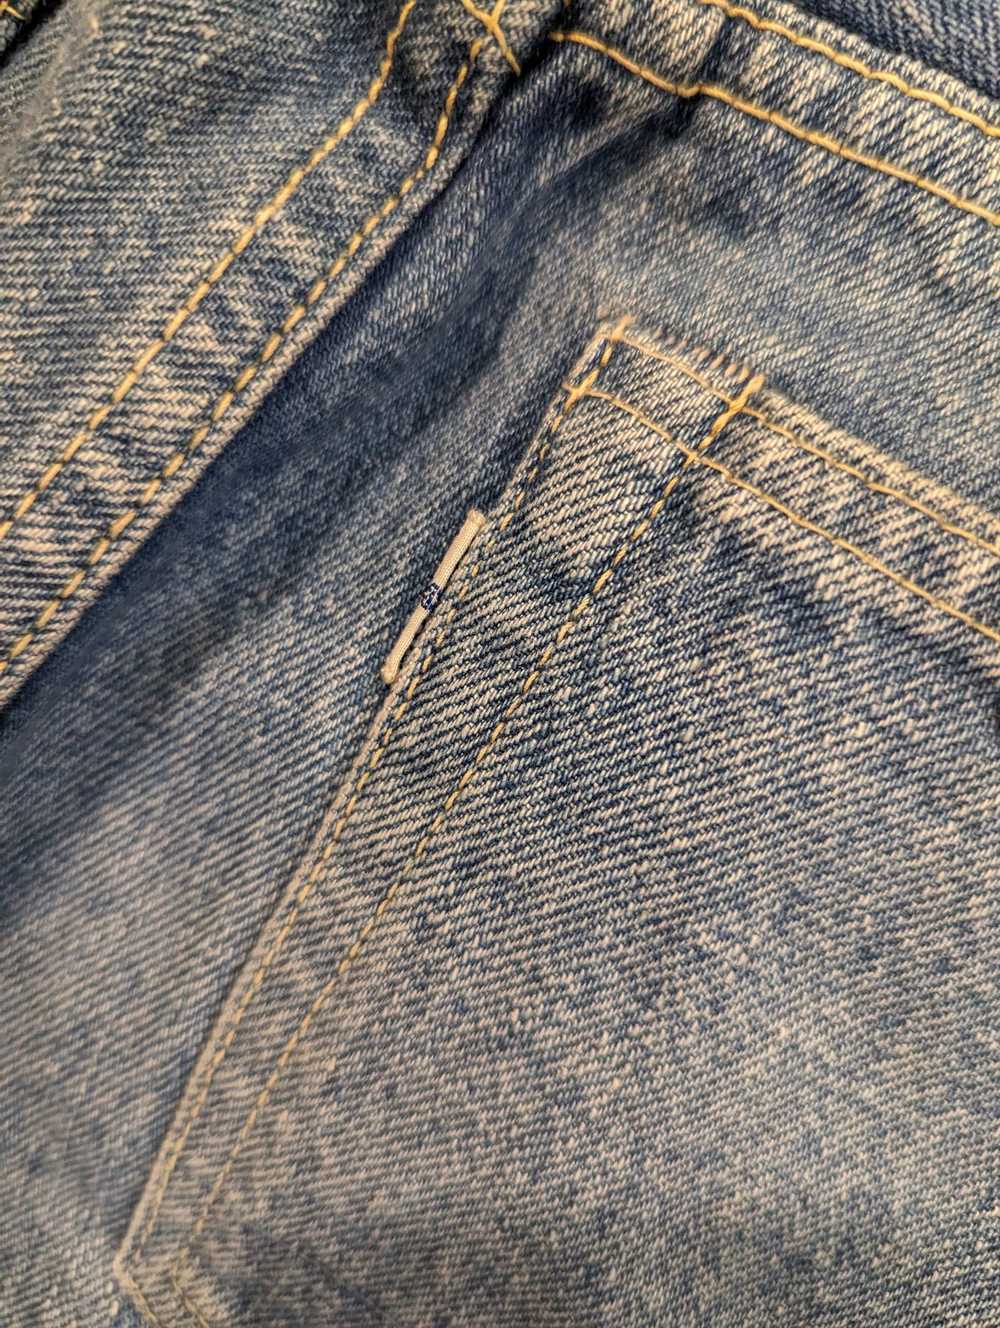 Orslow Selvedge jeans, made in Japan - image 10